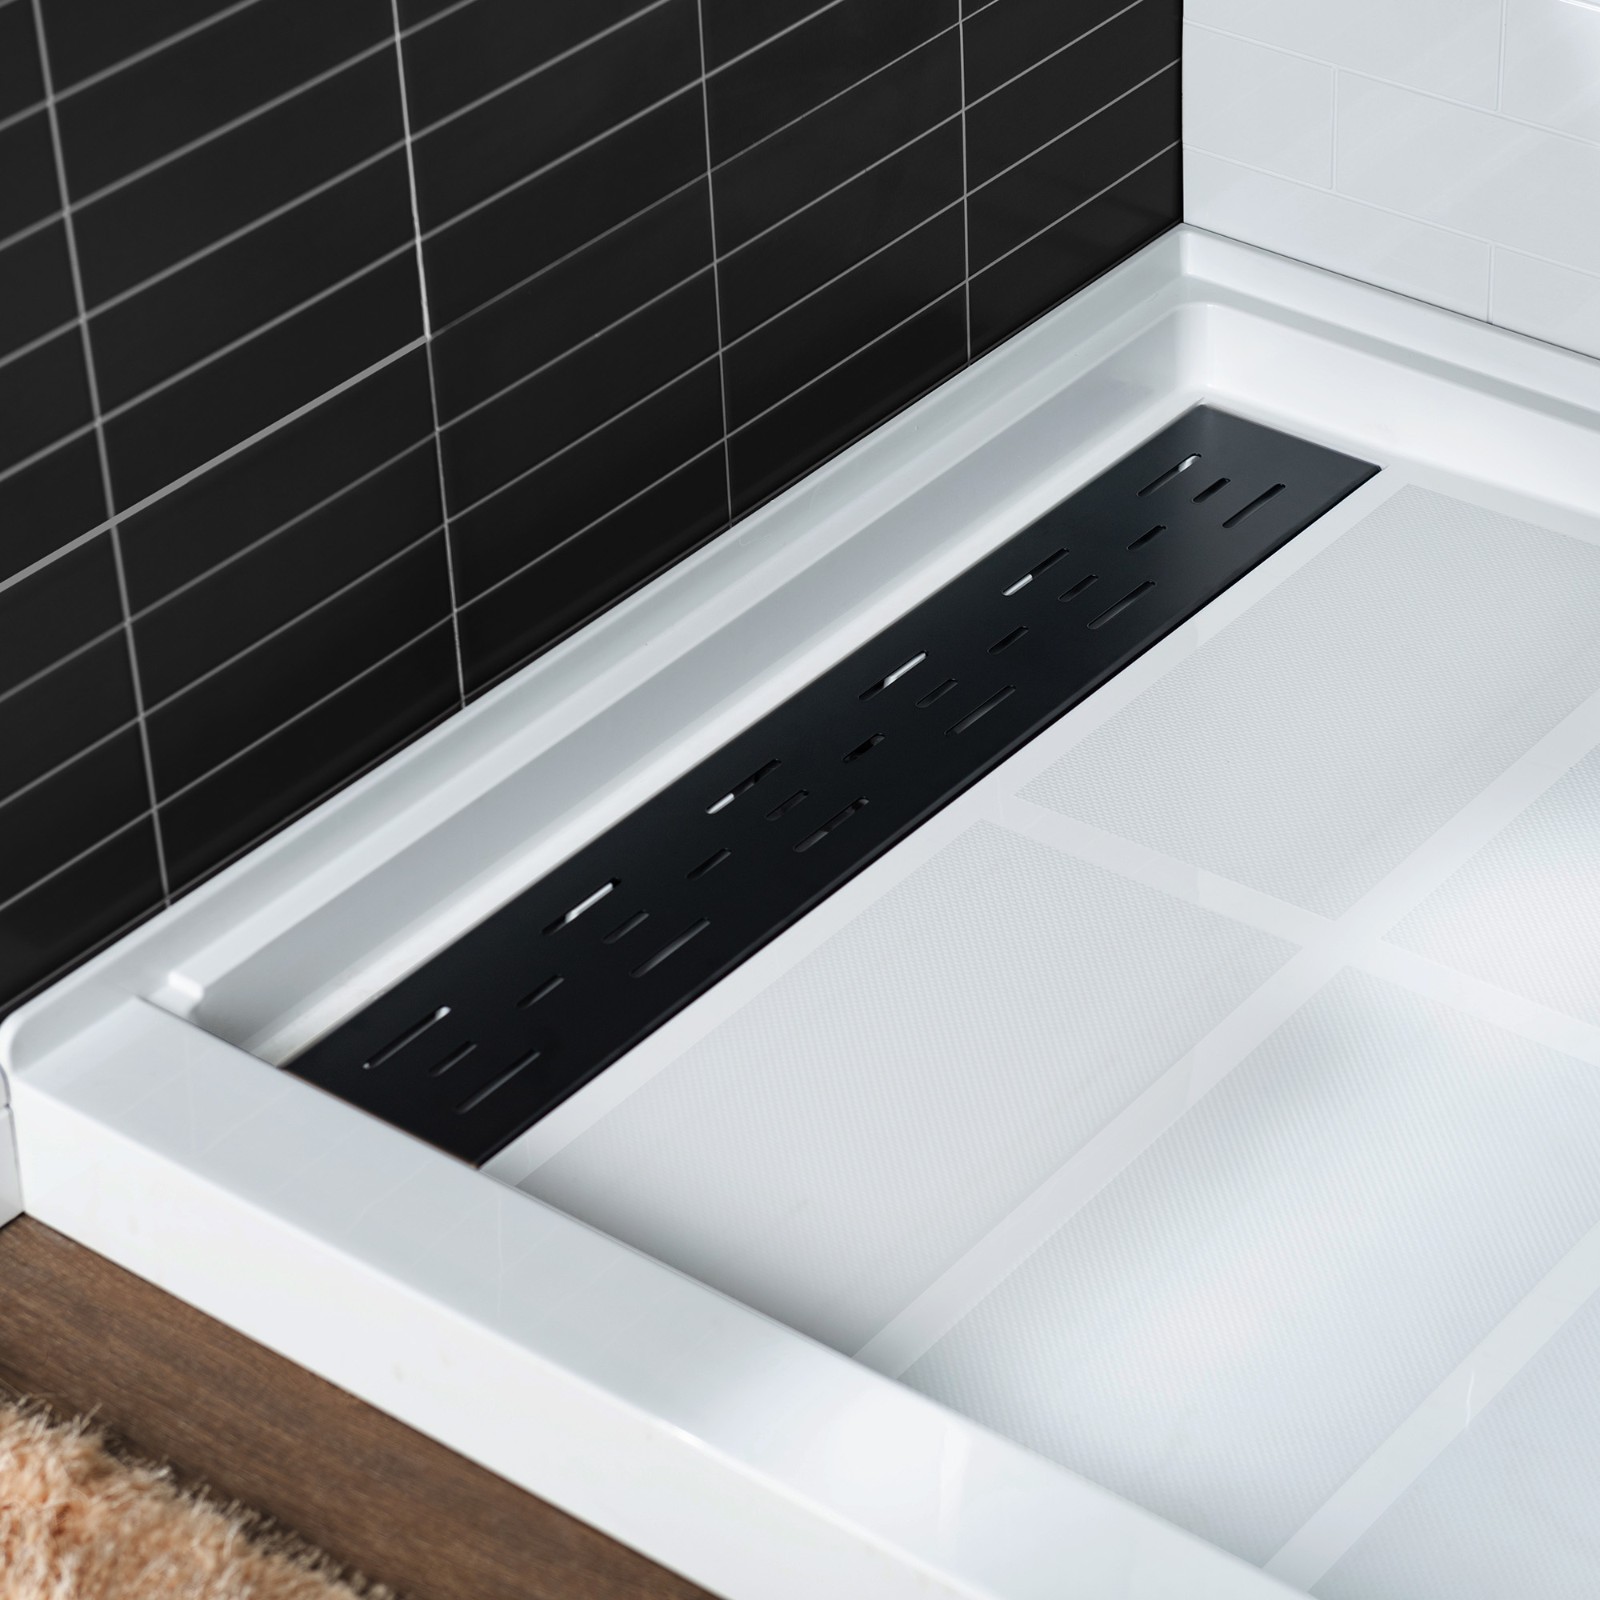  WOODBRIDGE SBR4832-1000L-MB SolidSurface Shower Base with Recessed Trench Side Including Matte Black Linear Cover, 48